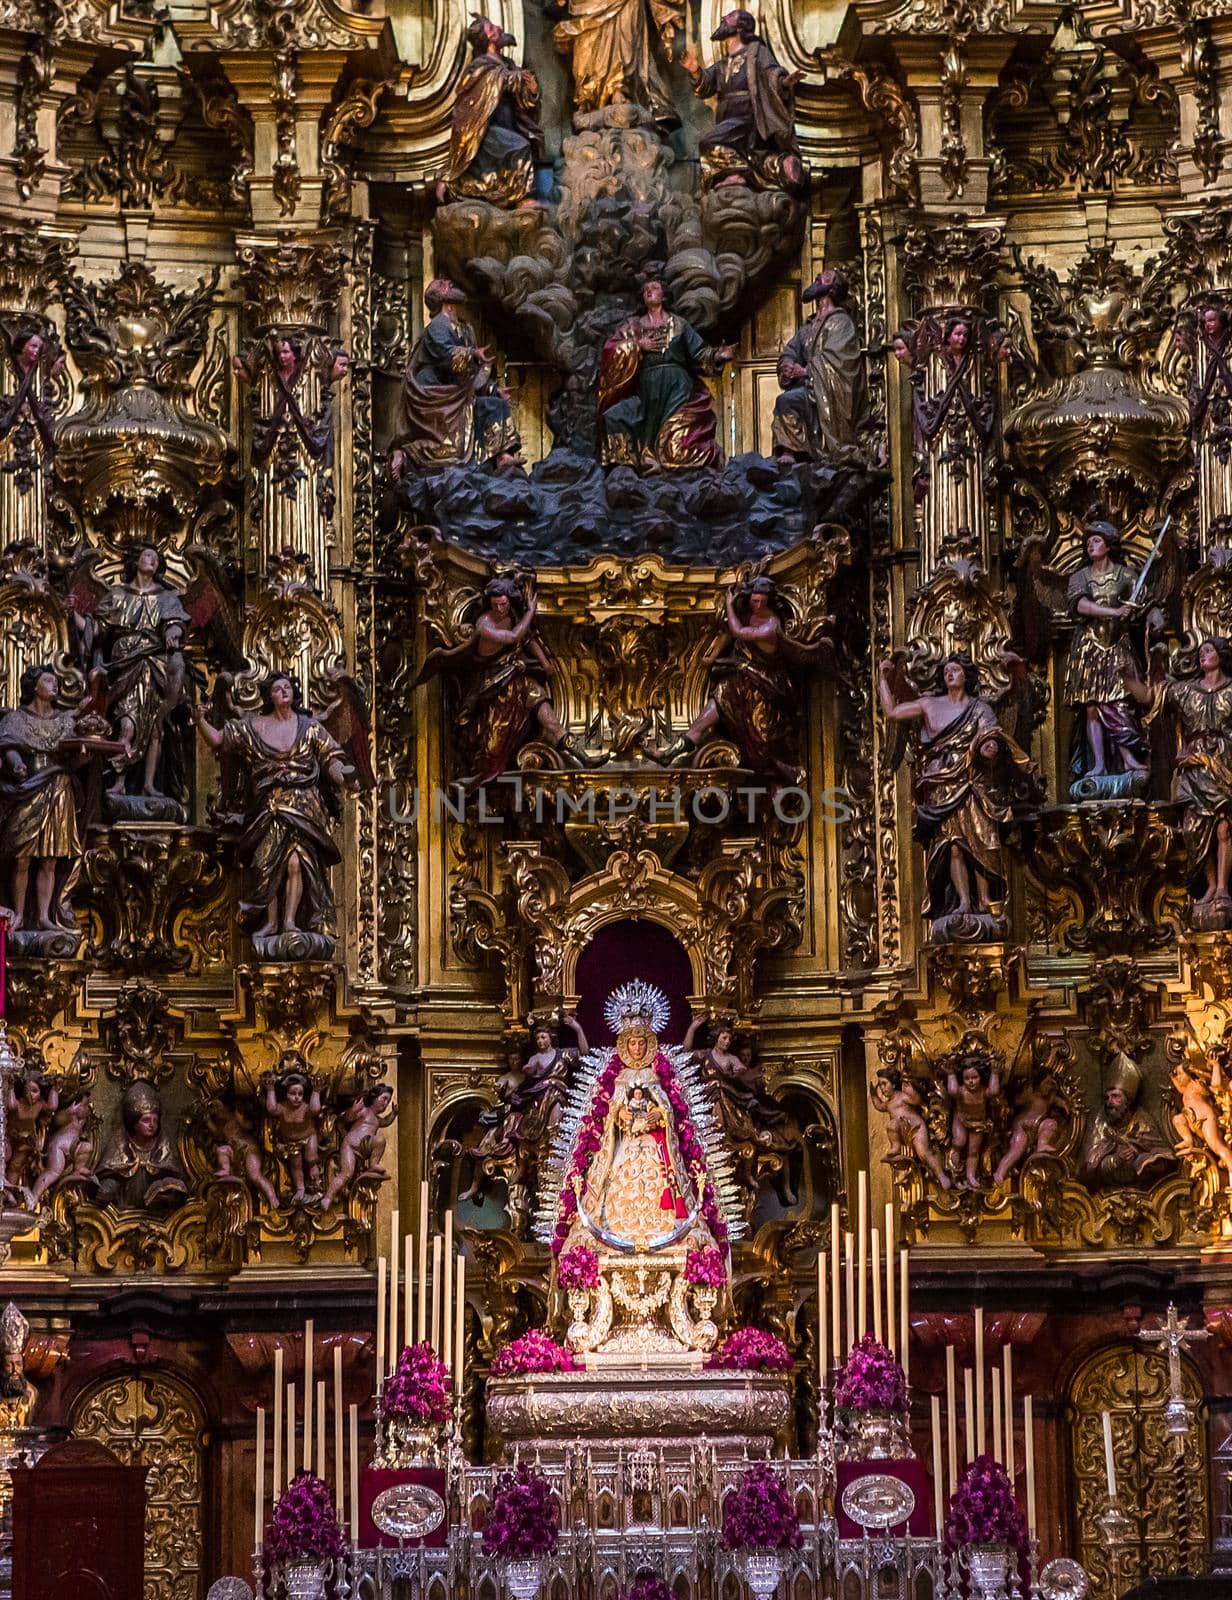 El Salvador church, Seville, Andalusia, spain by photogolfer